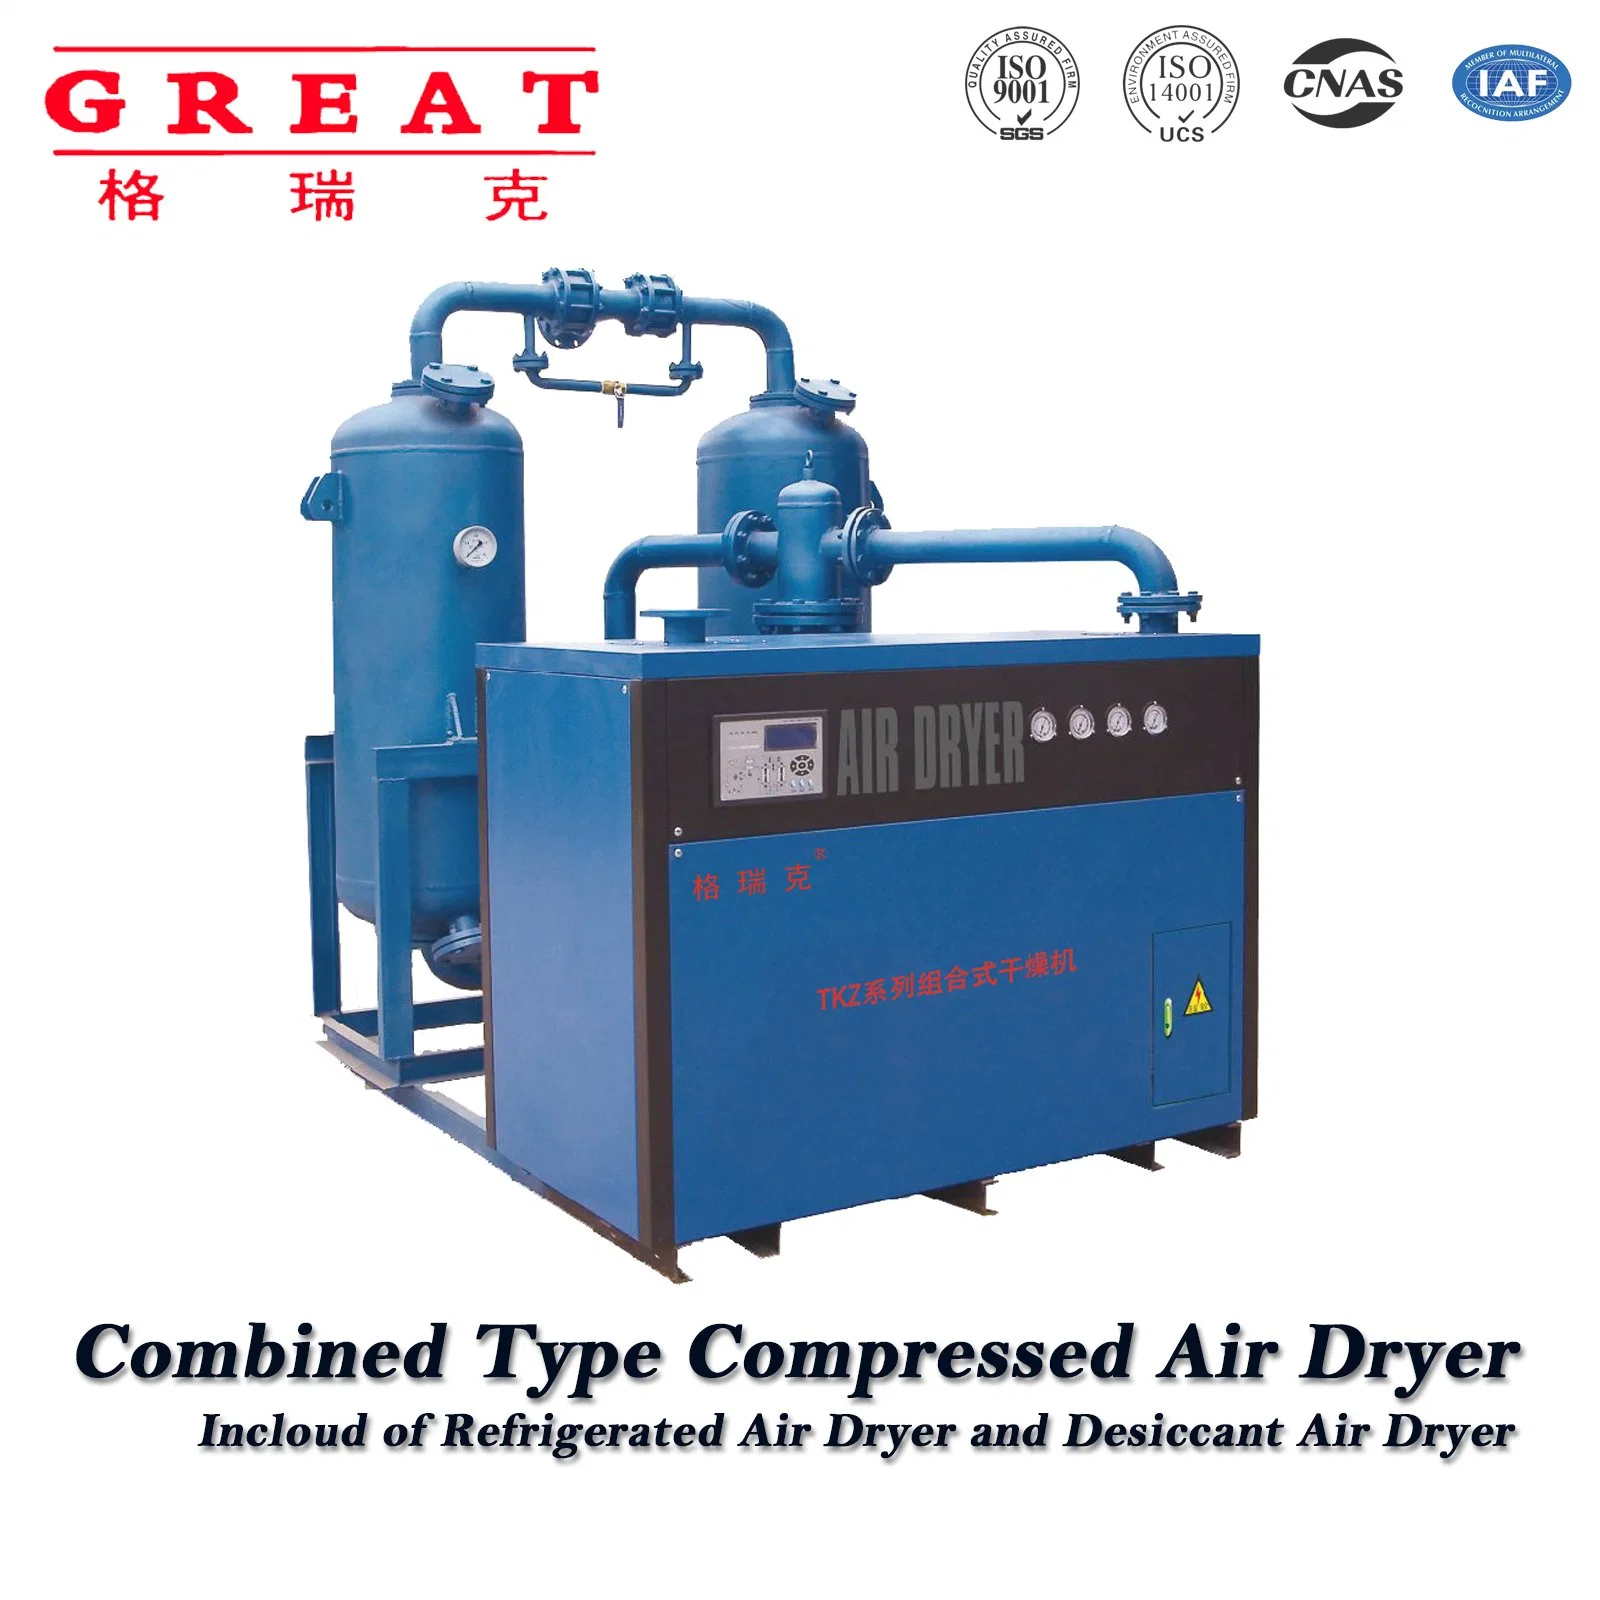 "Great" Tkzw/Tkzr-8 Combined Type Compressed Air Dryer